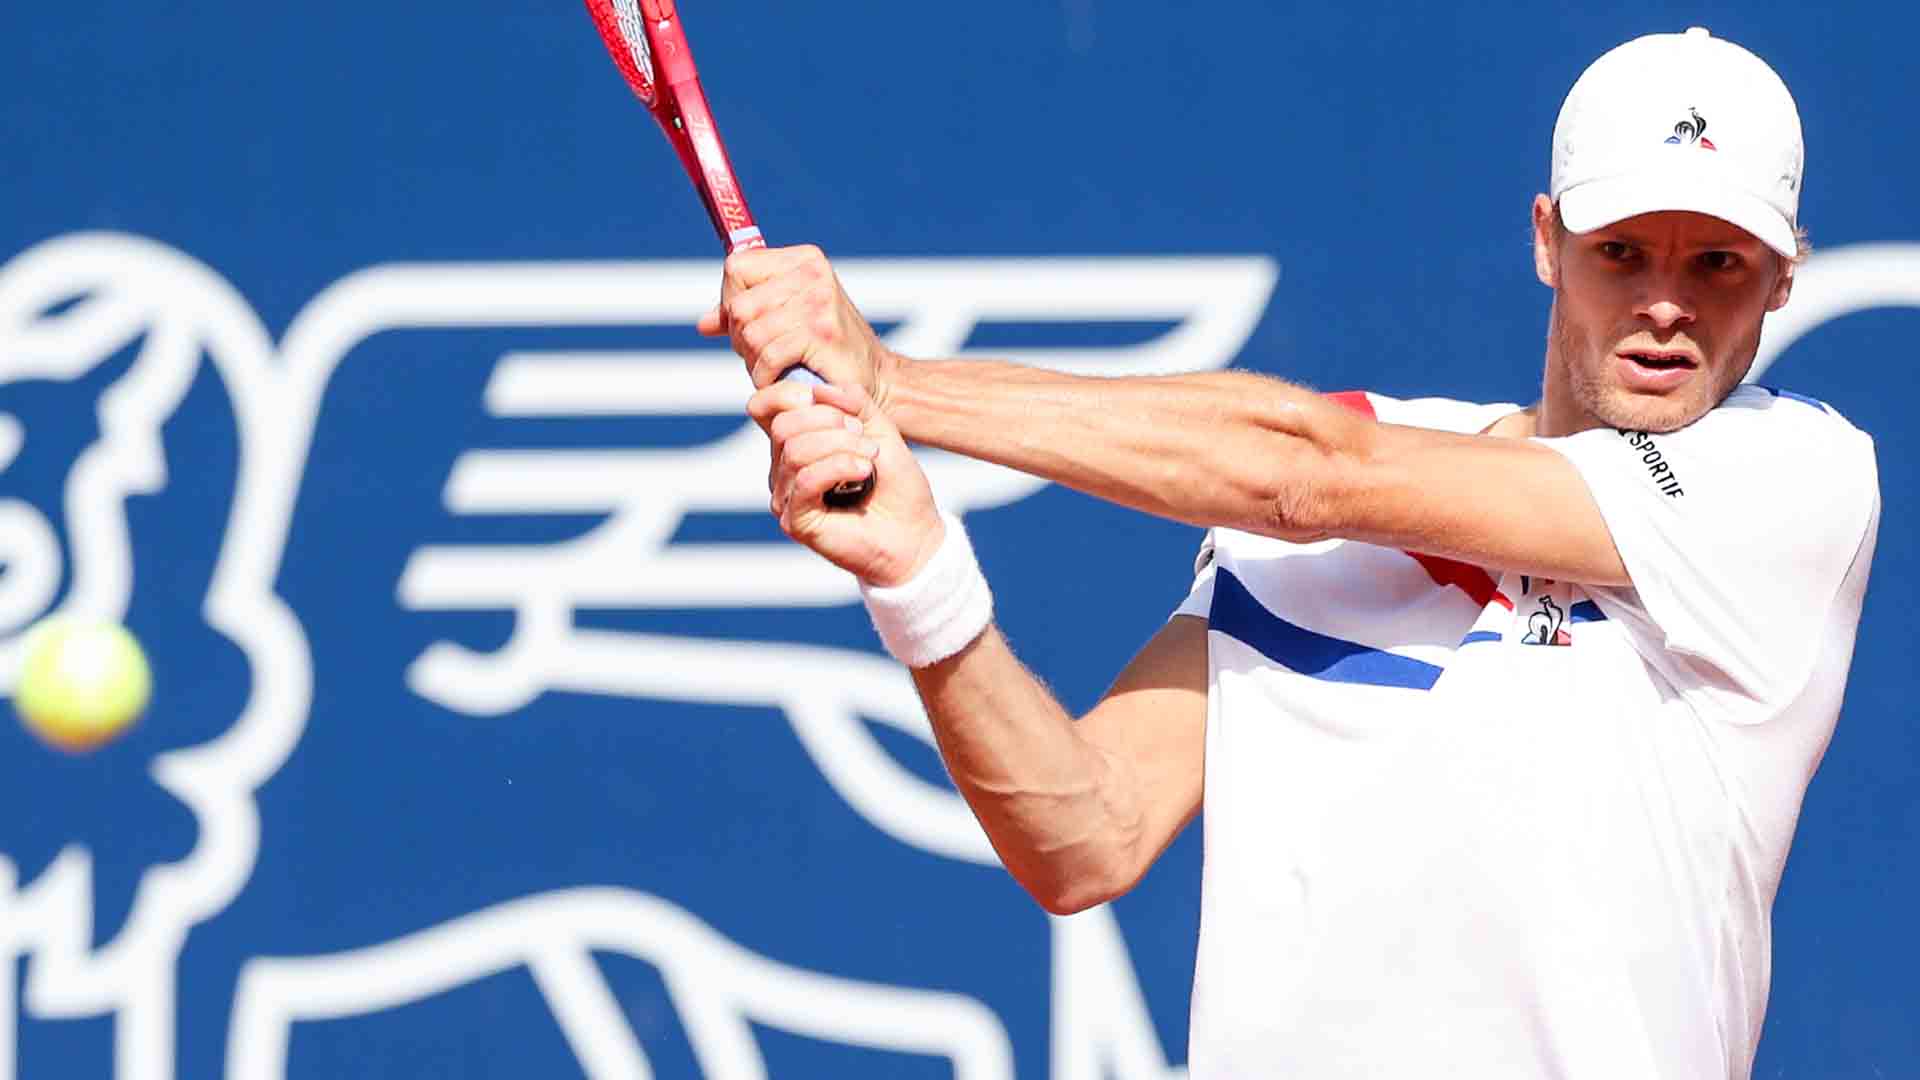 Yannick Hanfmann has won six matches from qualifying at the Generali Open.